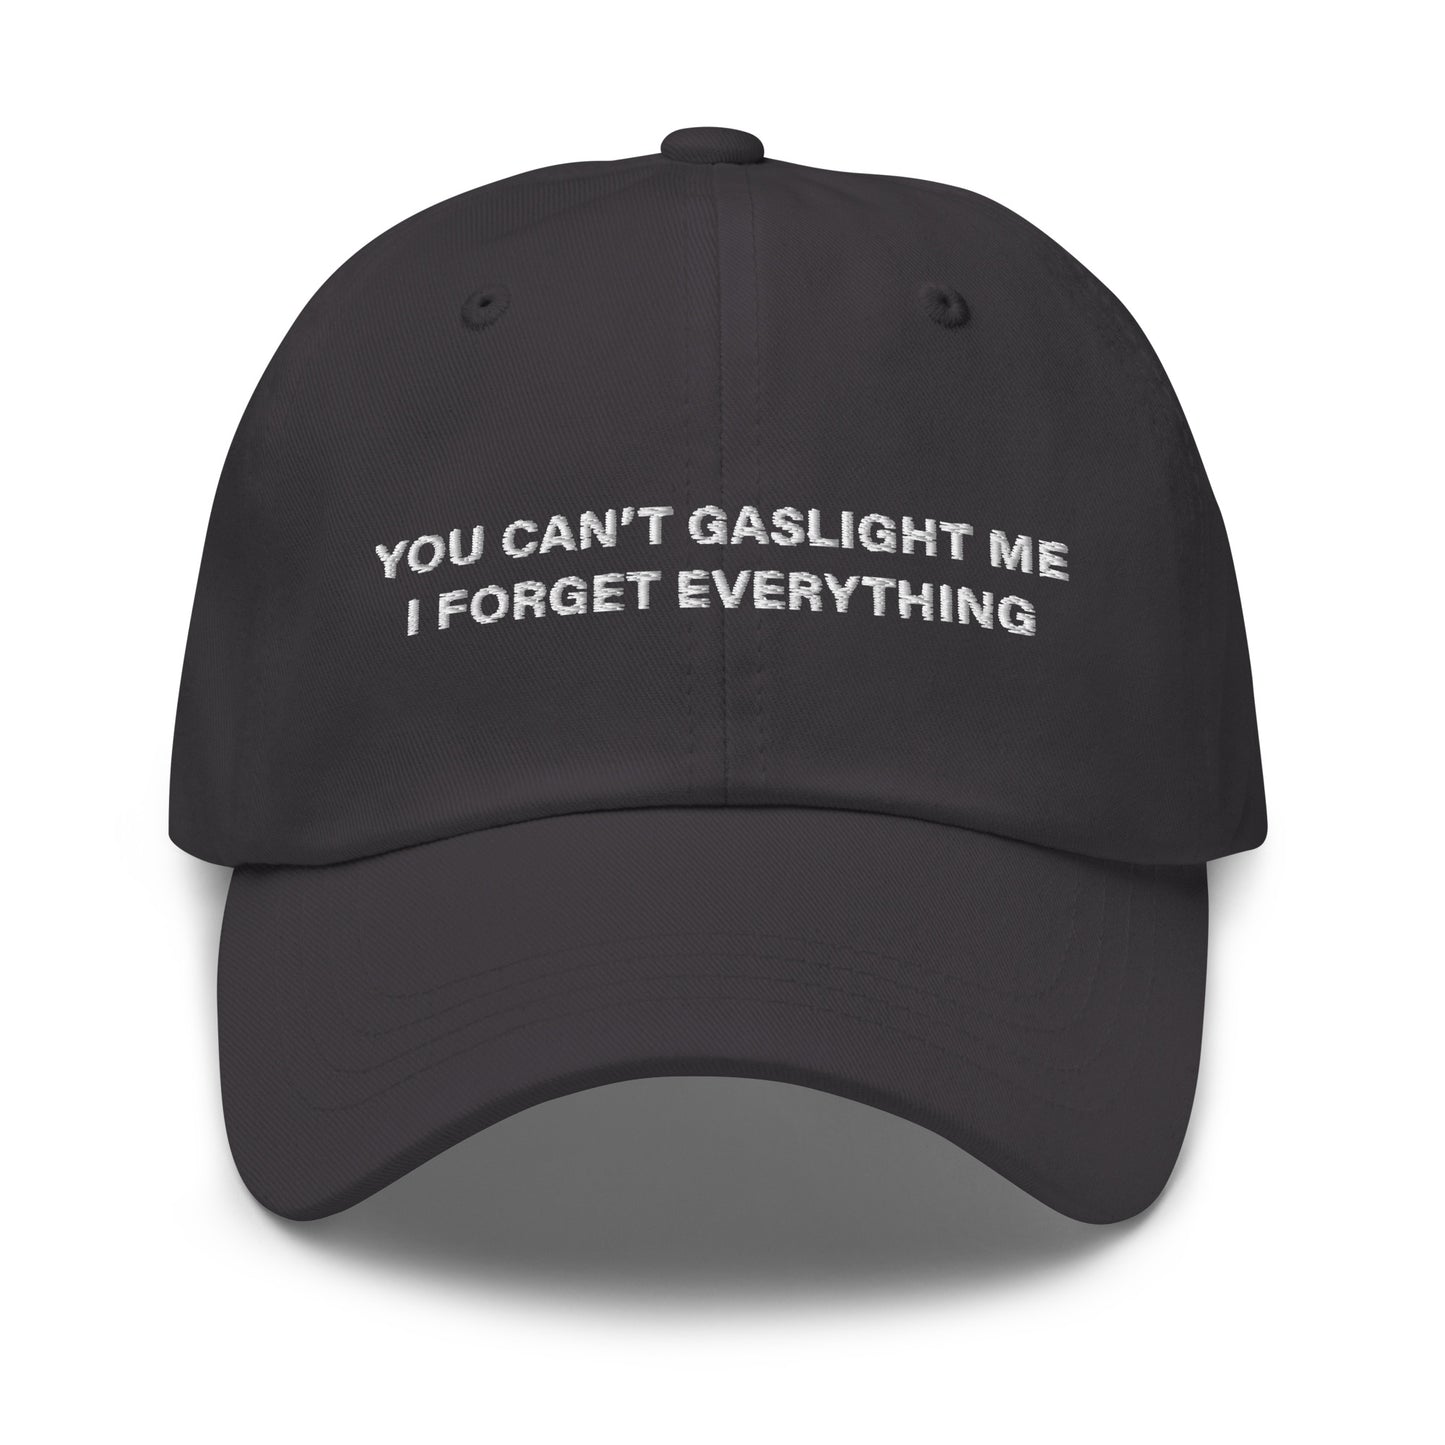 You Can't Gaslight Me hat